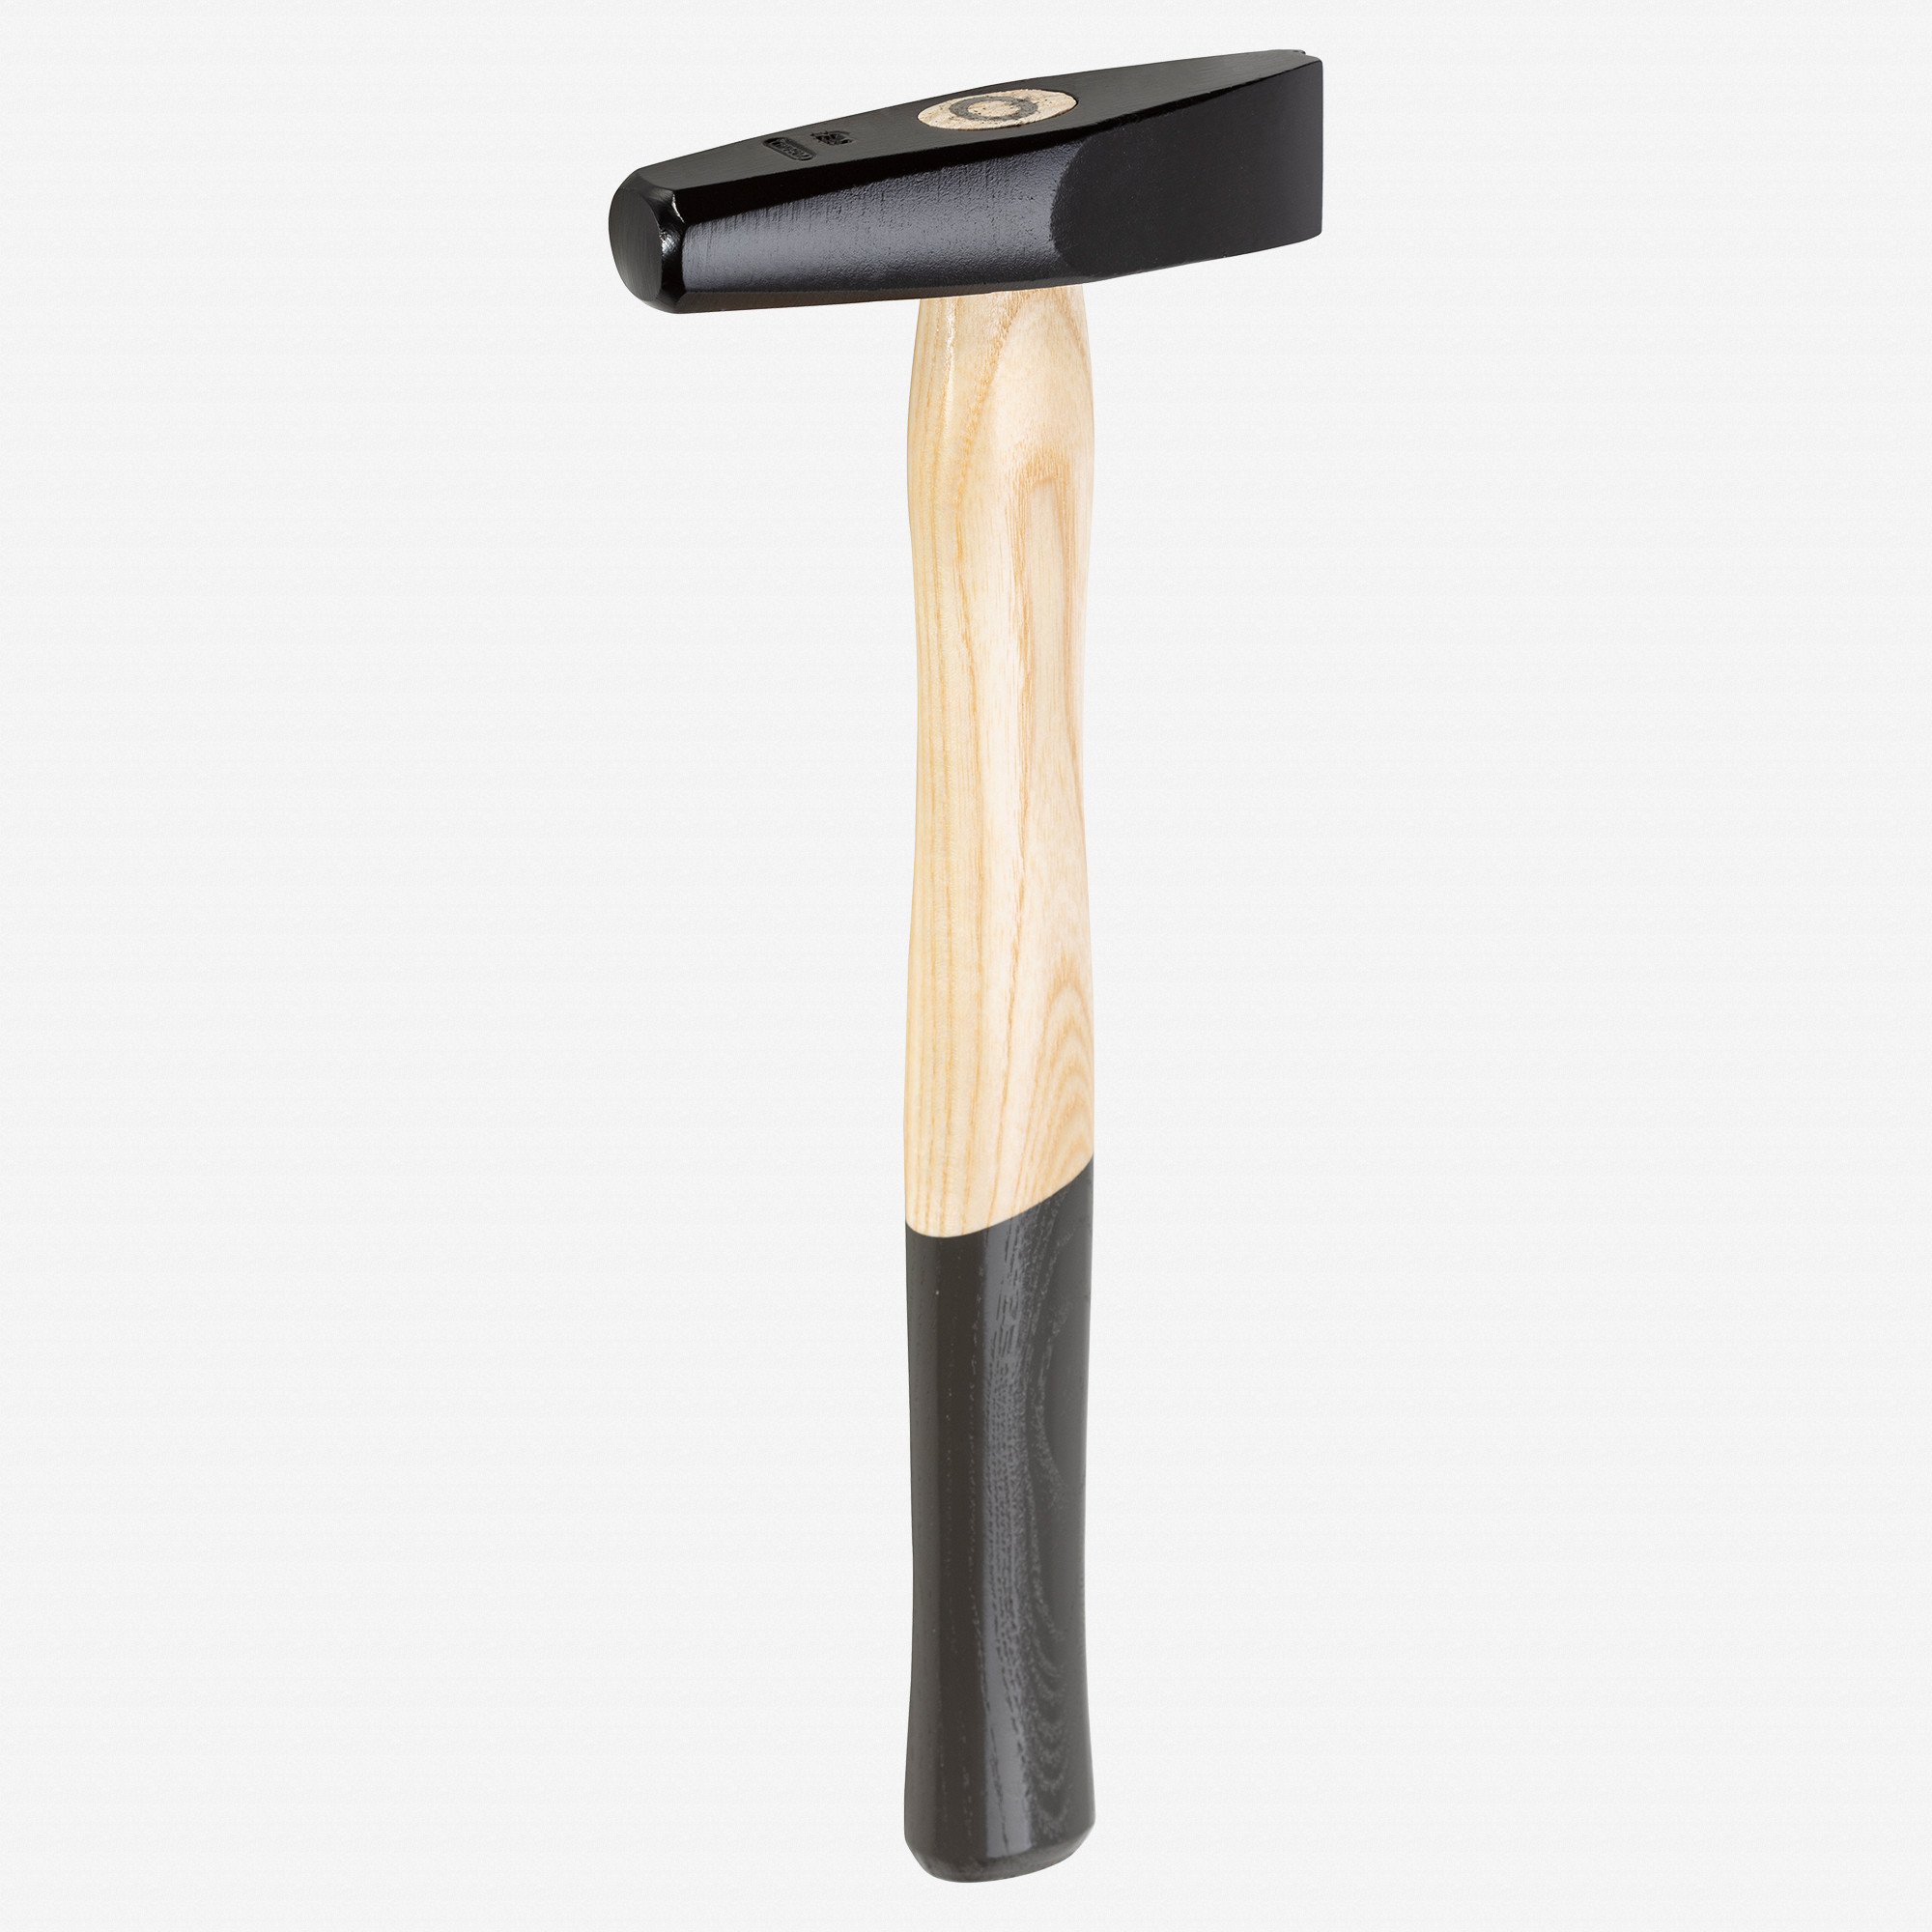 Picard 104 Coopers' Hammer with Ash Handle, 600g